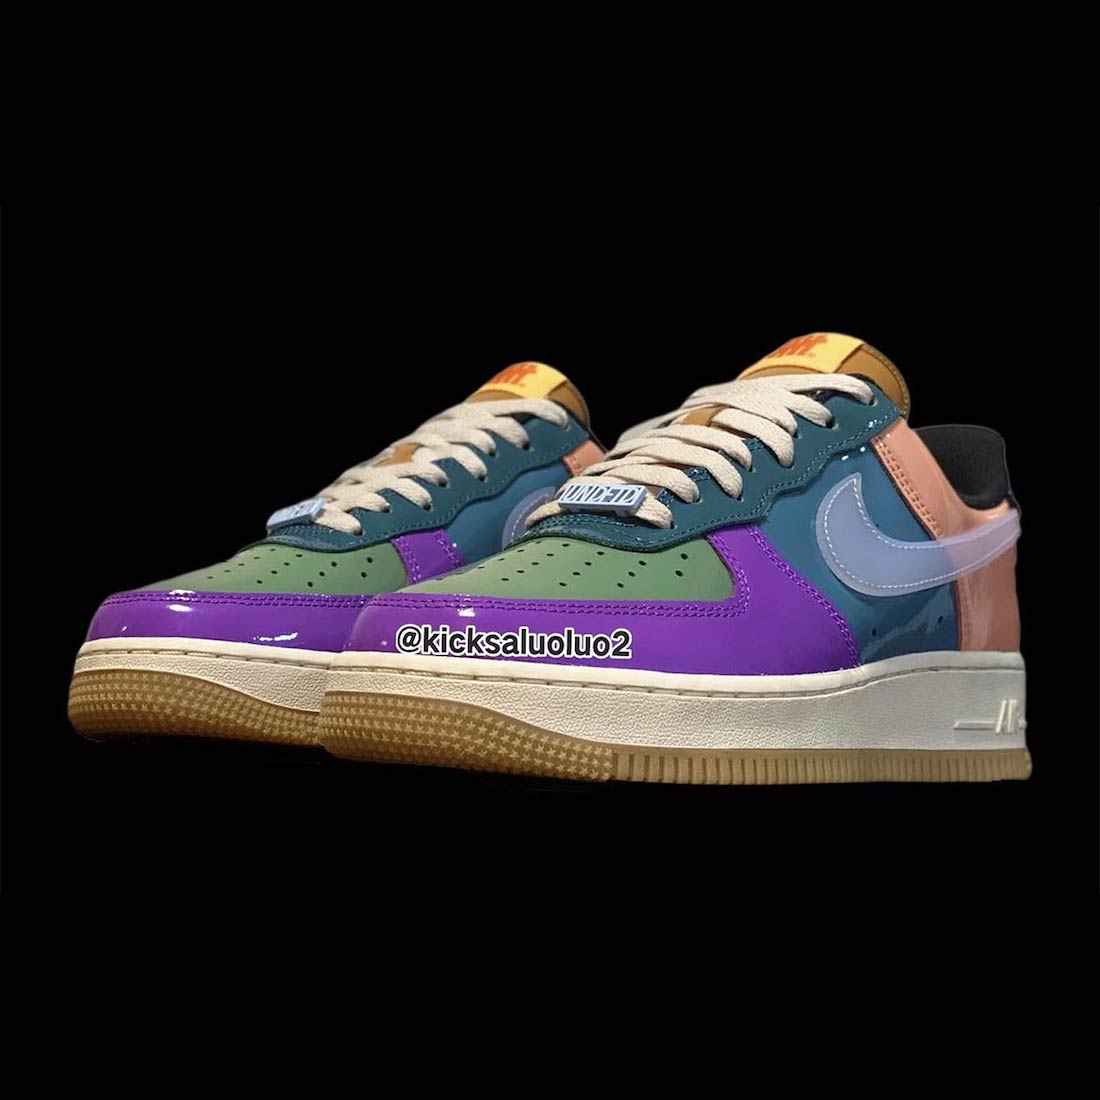 Undefeated x Nike Air Force 1 Low "Multi-Patent" 